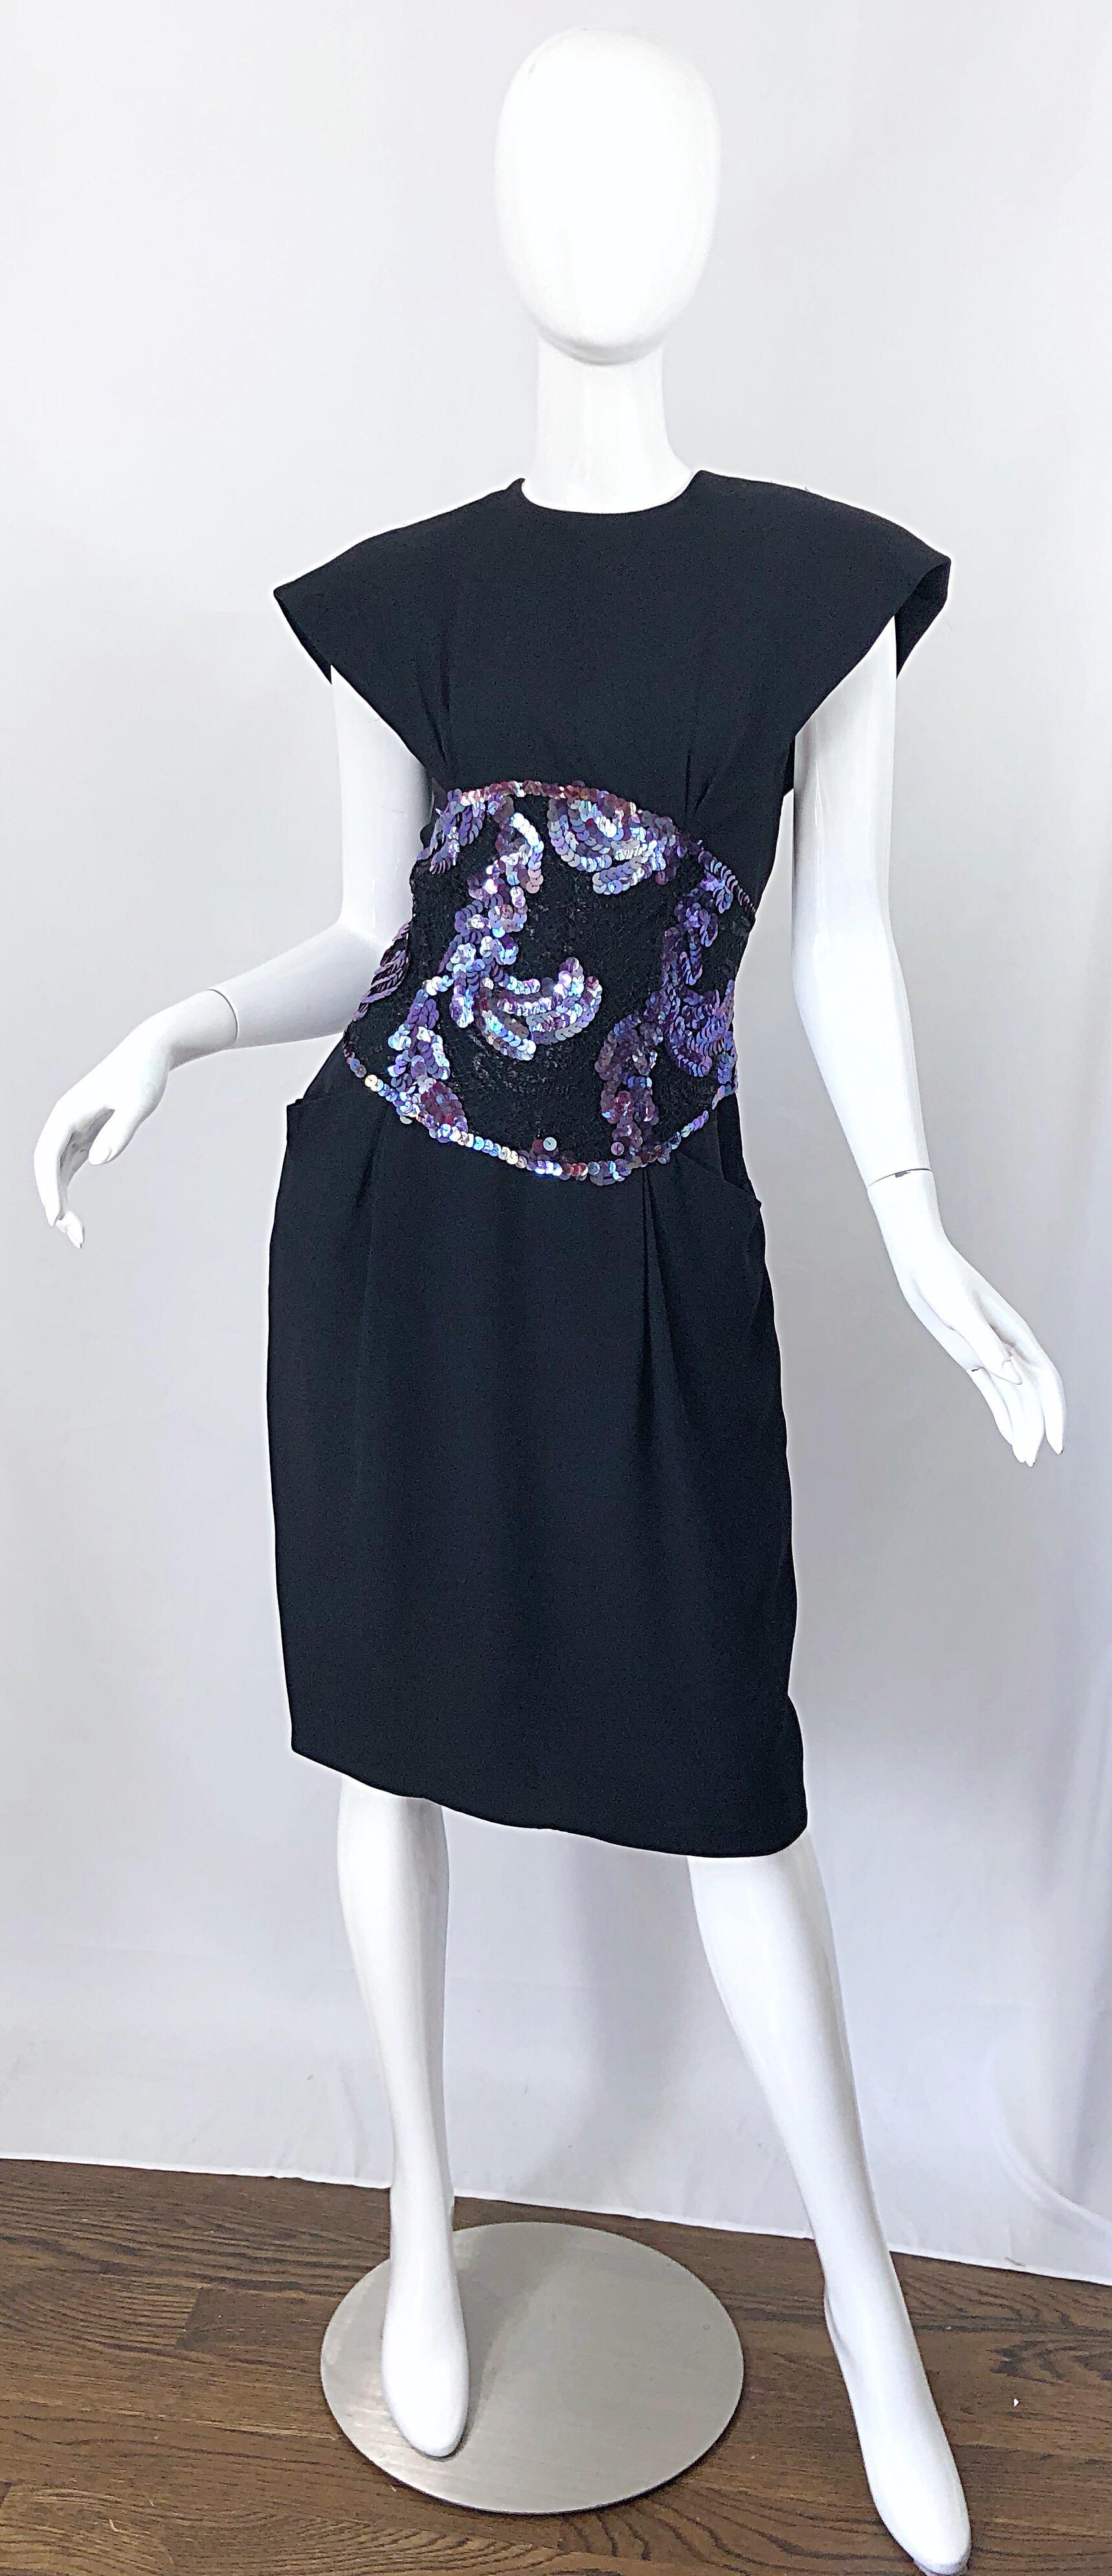 Avant Garde vintage late 80s GEOFFREY BEENE black silk, lace and purple sequin cocktail dress! Features statement worthy strong shoulder with shoulder pads that could easily be removed, if desired. Super flattering and forgiving fit that looks great